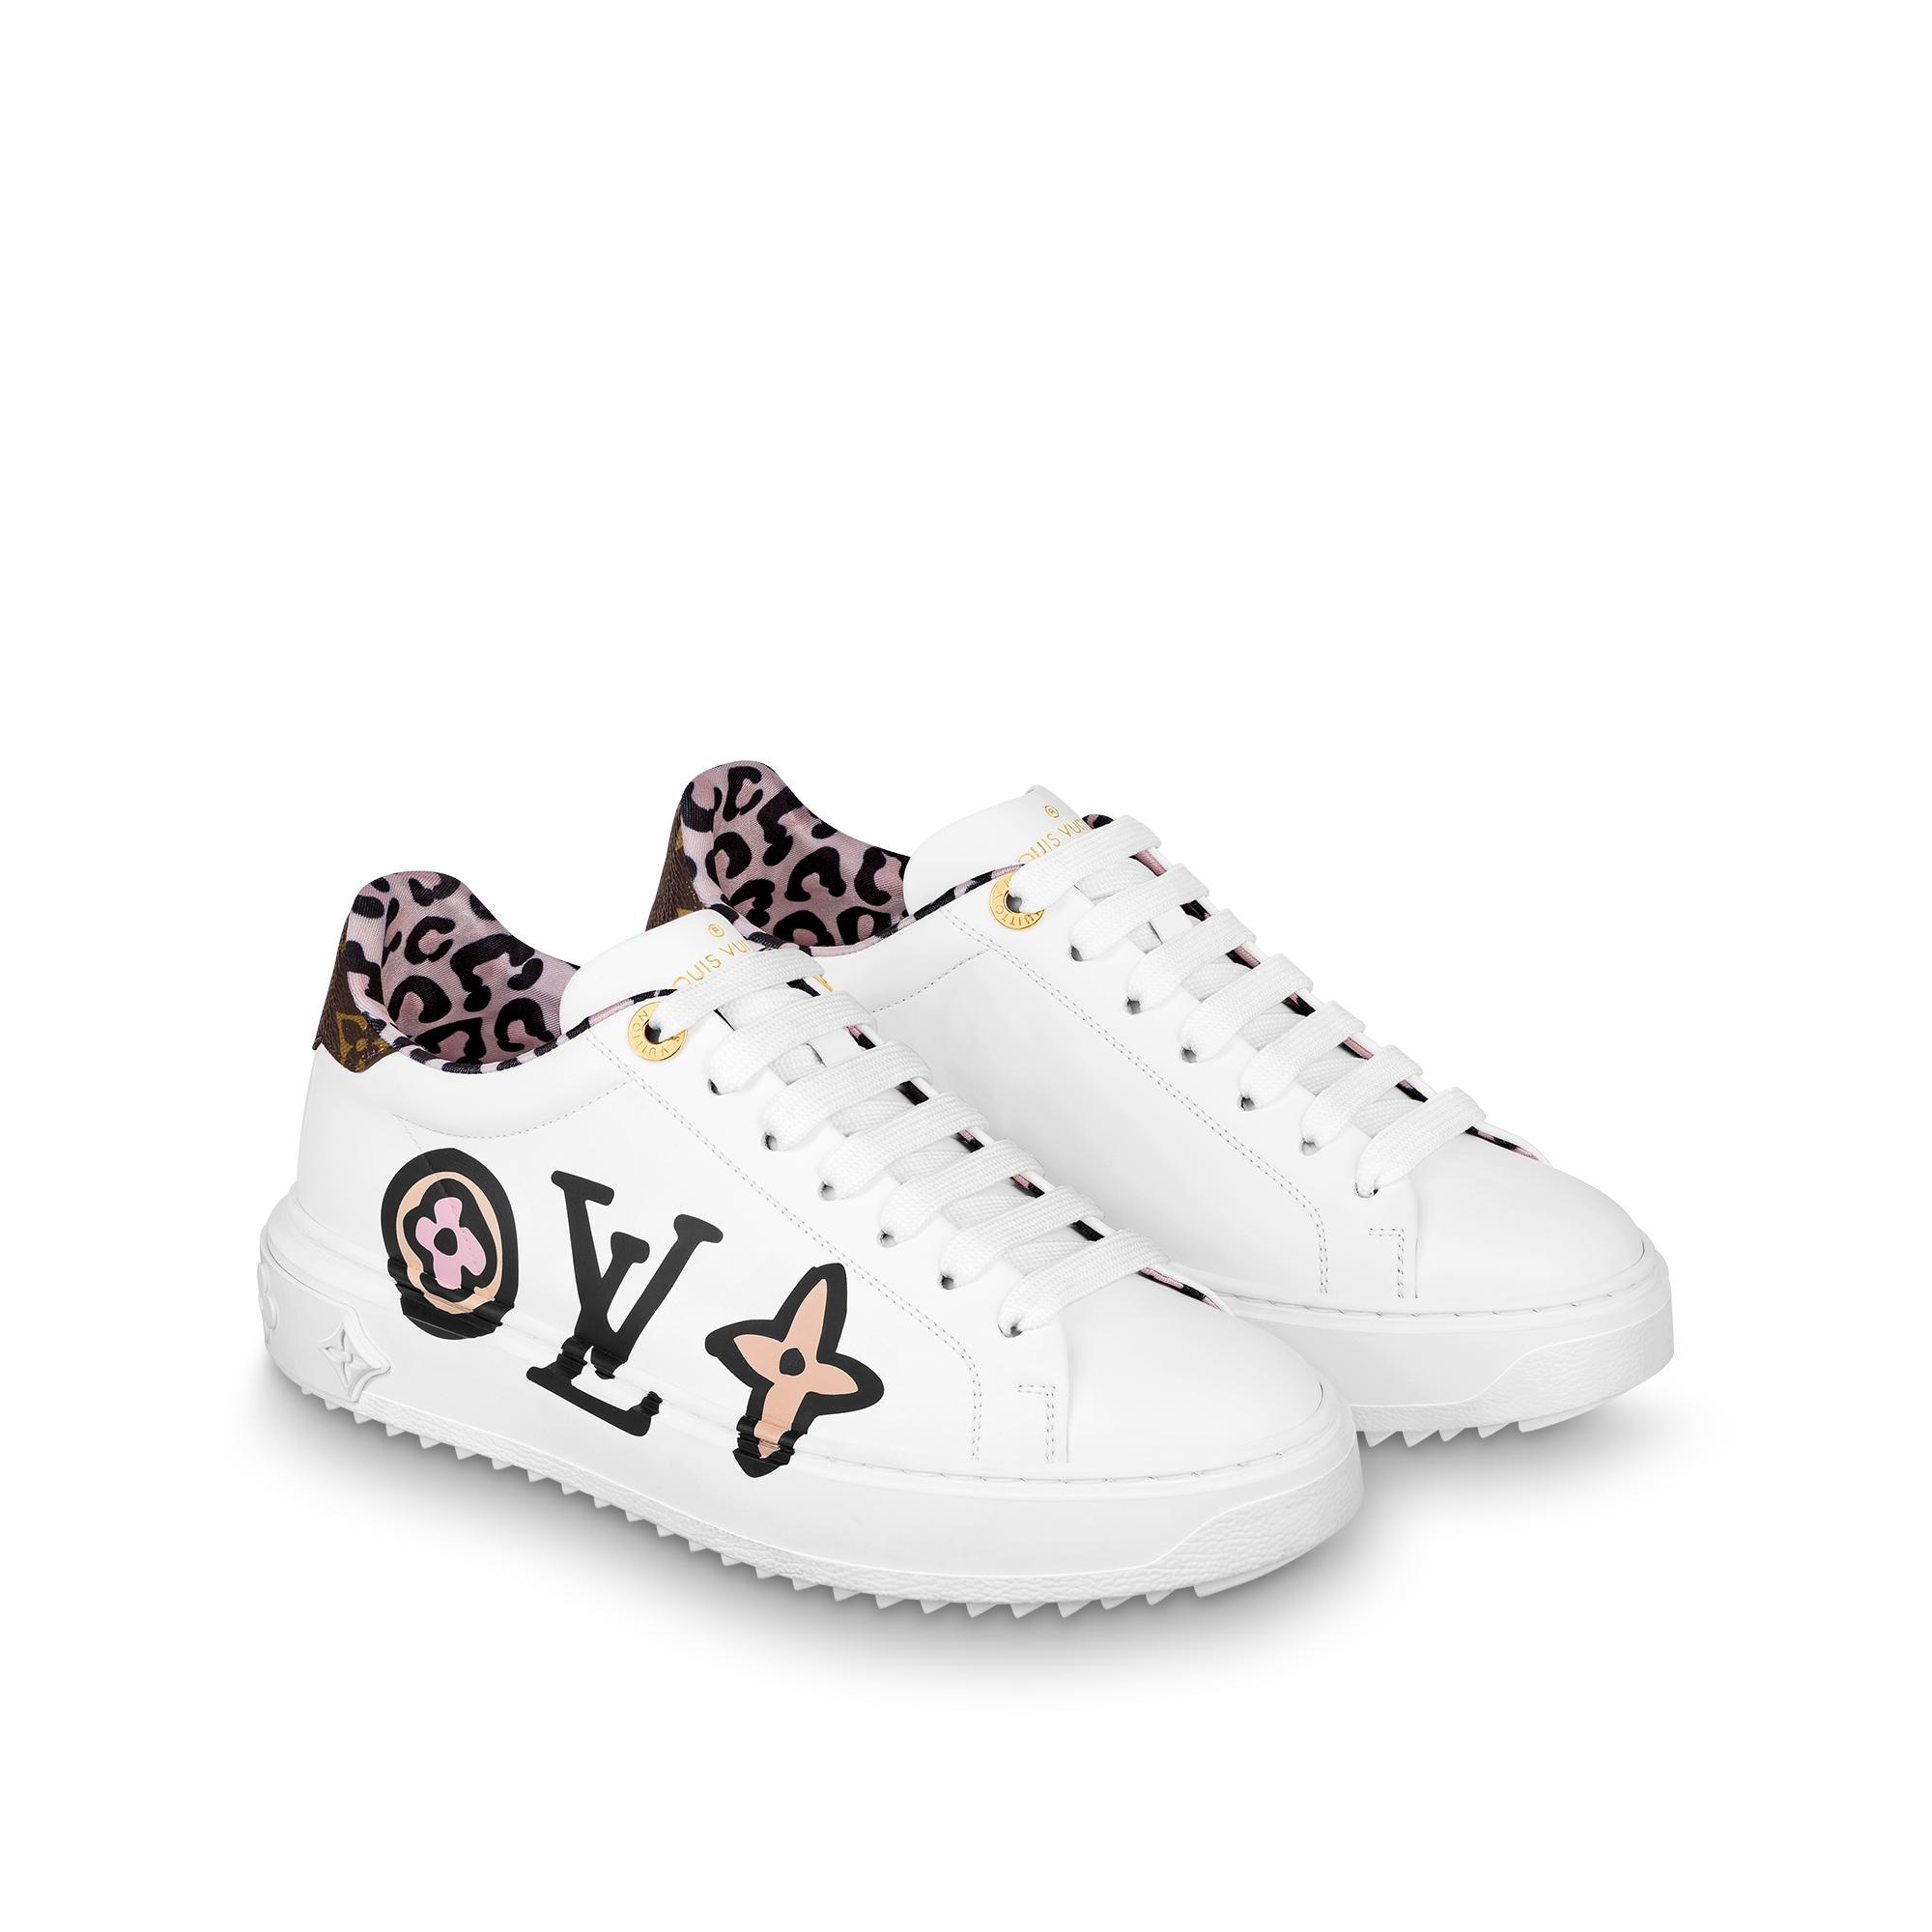 Louis Vuitton Time Out Sneaker in White - Shoes 1A93XD - $140.40 